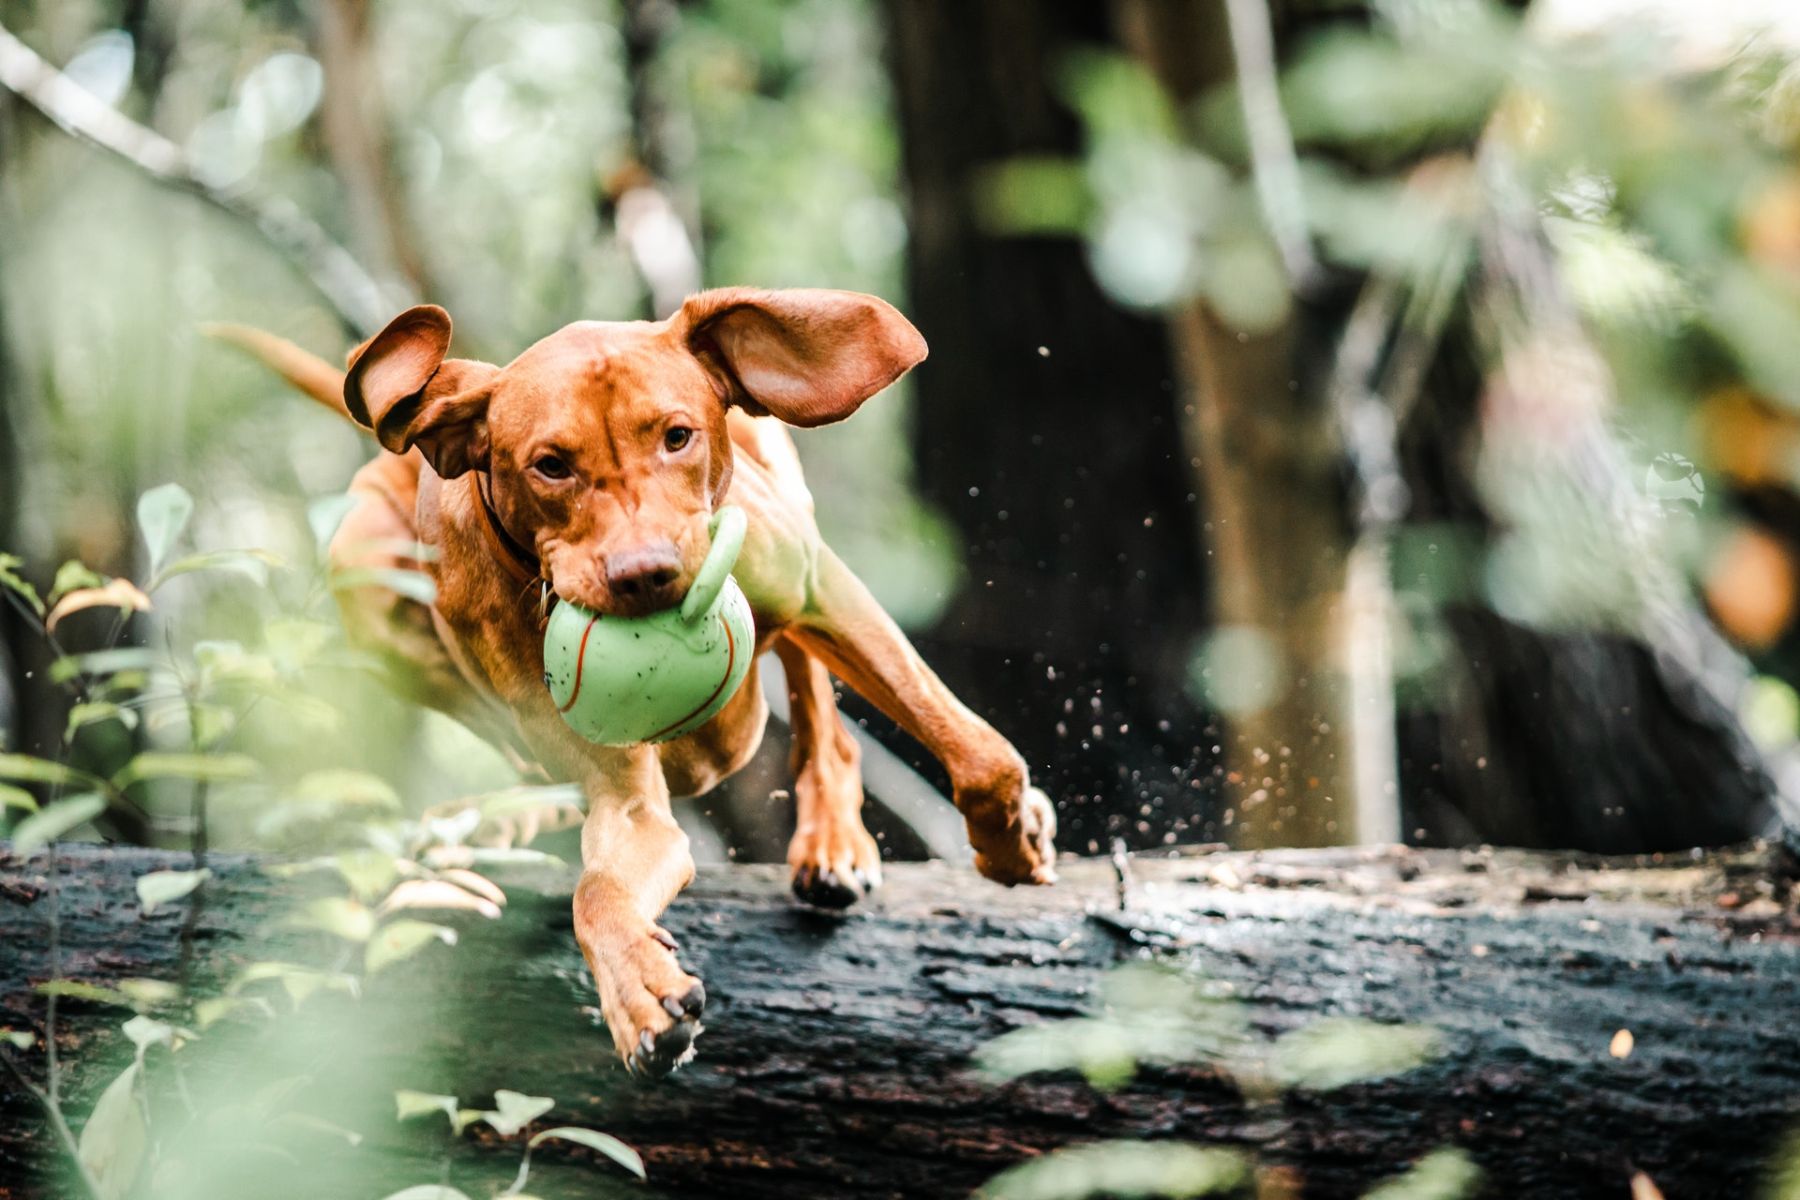 dog with ball in mouth jumping over a fallen tree trunk 3013467 copy